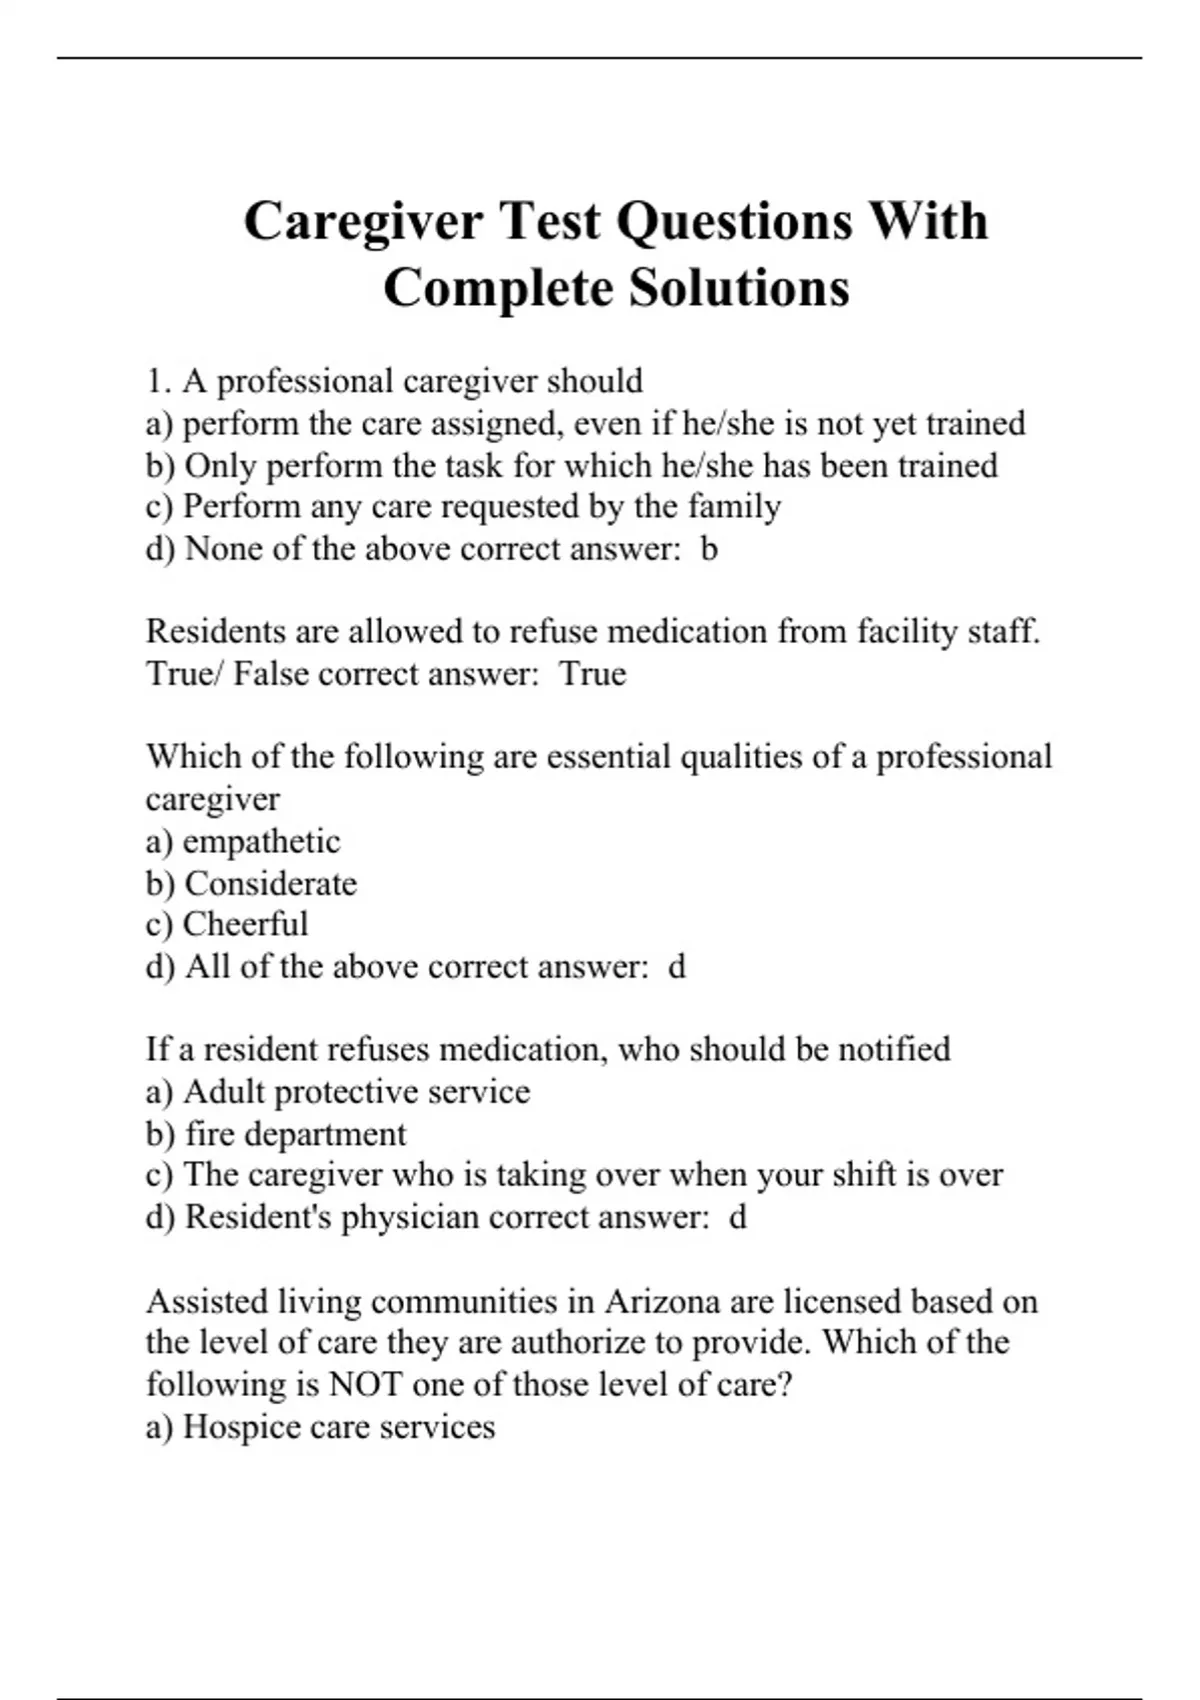 Caregiver Test Questions With Complete Solutions Caregiver